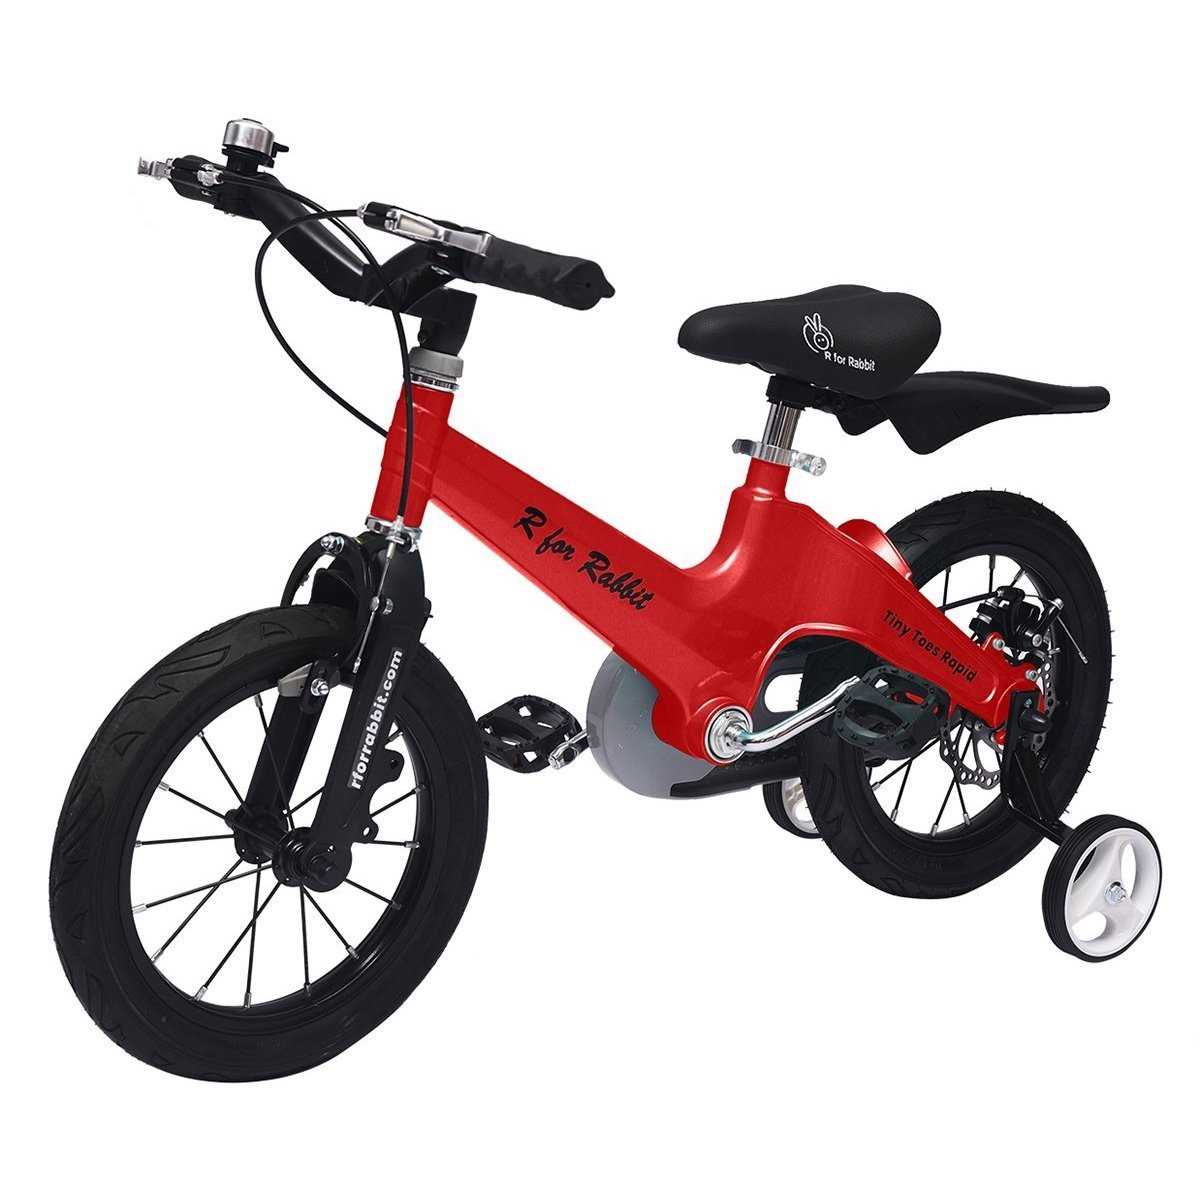 R FOR RABBIT Tiny Toes Rapid Plug and Play Kids Bicycle 14 inch T for 3 to 5 years